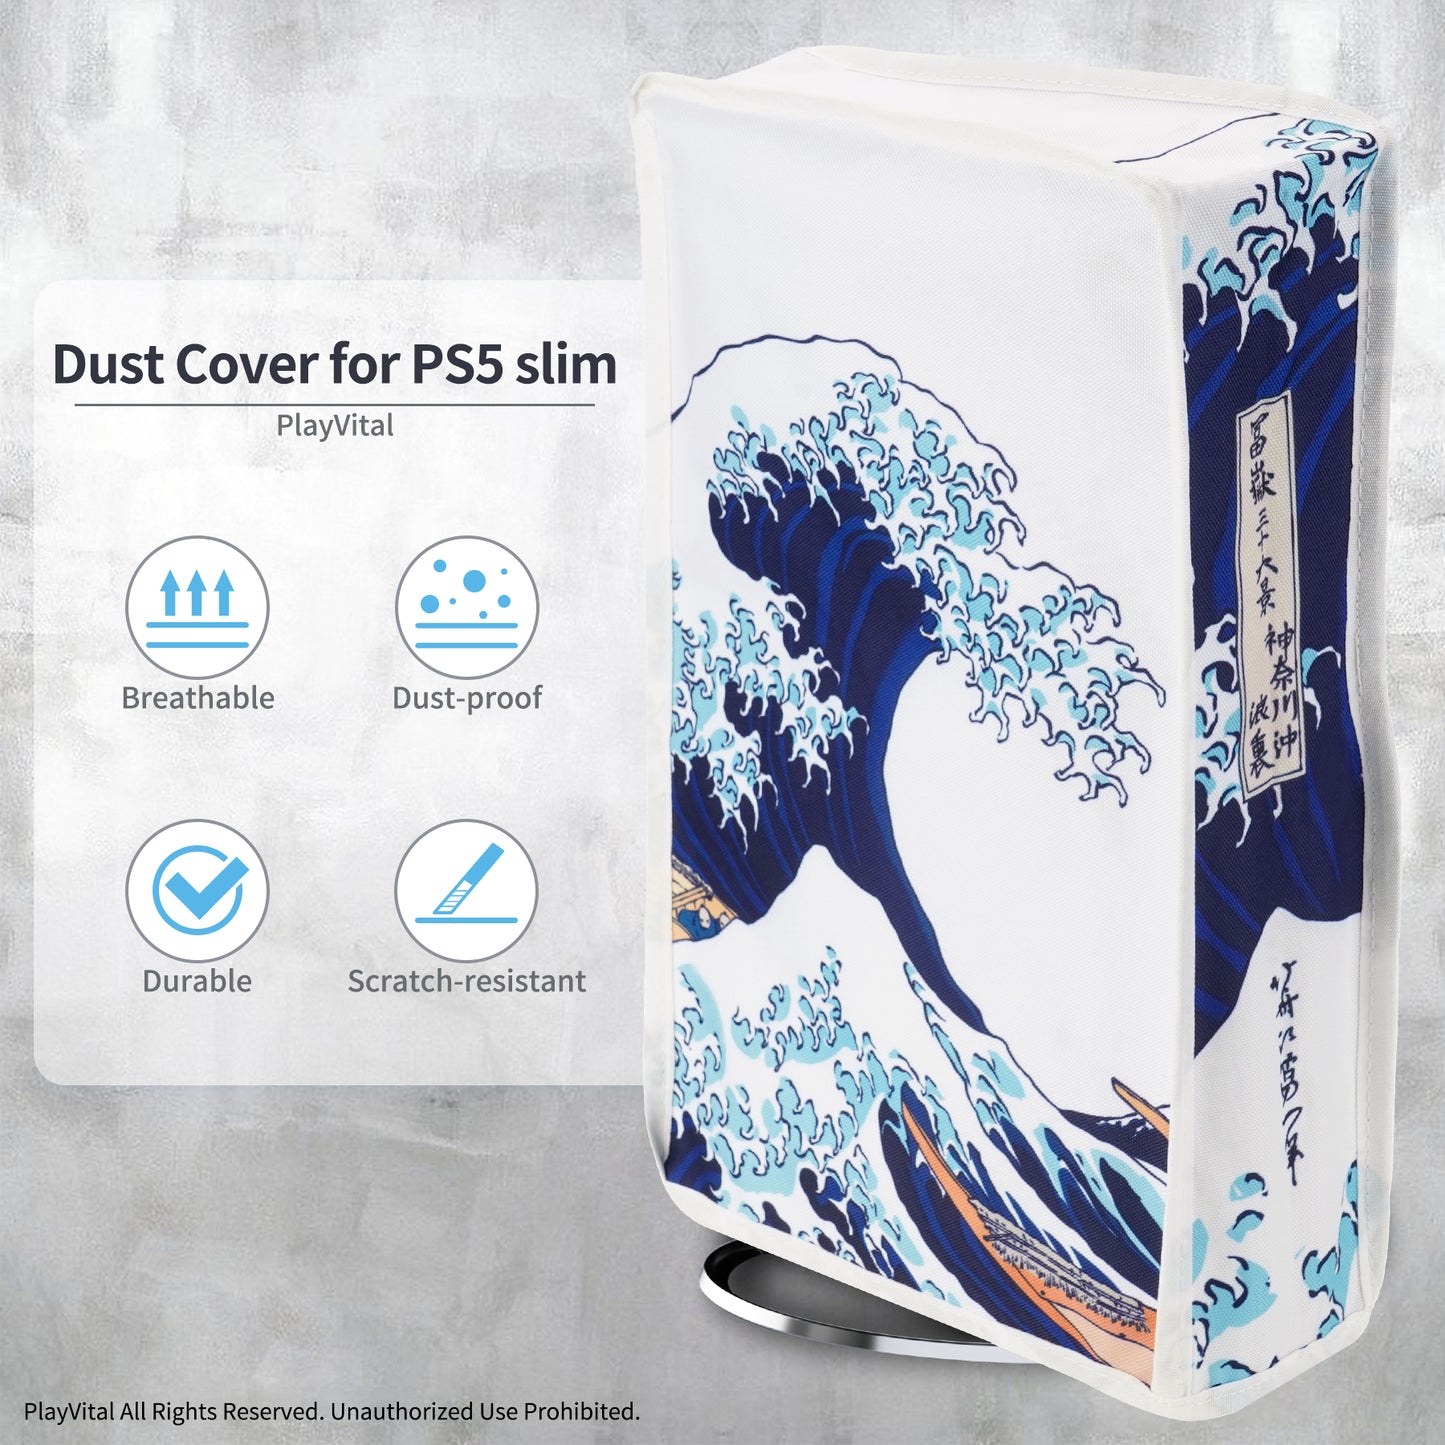 PlayVital Vertical Dust Cover for ps5 Slim Disc Edition(The New Smaller Design), Nylon Dust Proof Protector Waterproof Cover Sleeve for ps5 Slim Console - The Great Wave - BMYPFH001 PlayVital